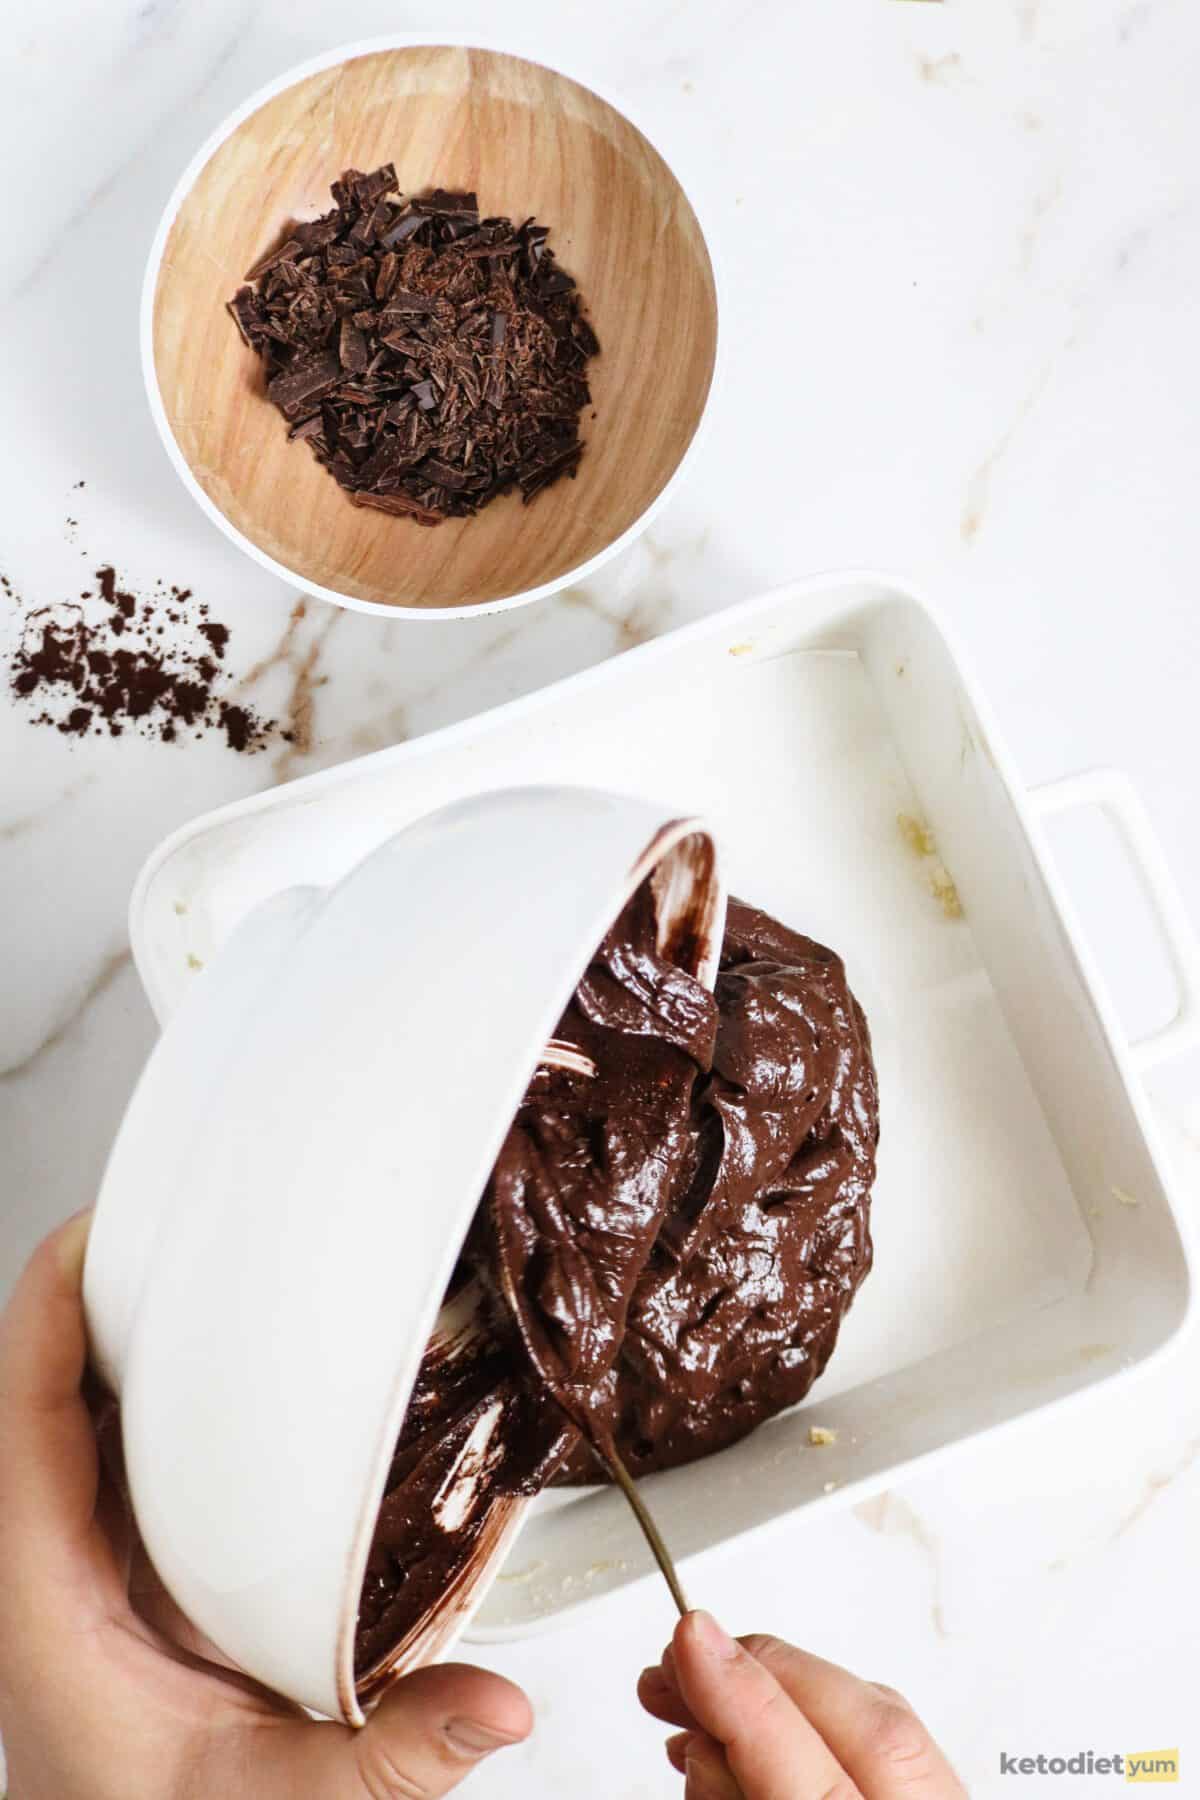 Pouring brownie batter from a bowl into a baking pan with a small bowl of chopped chocolate pieces in the background